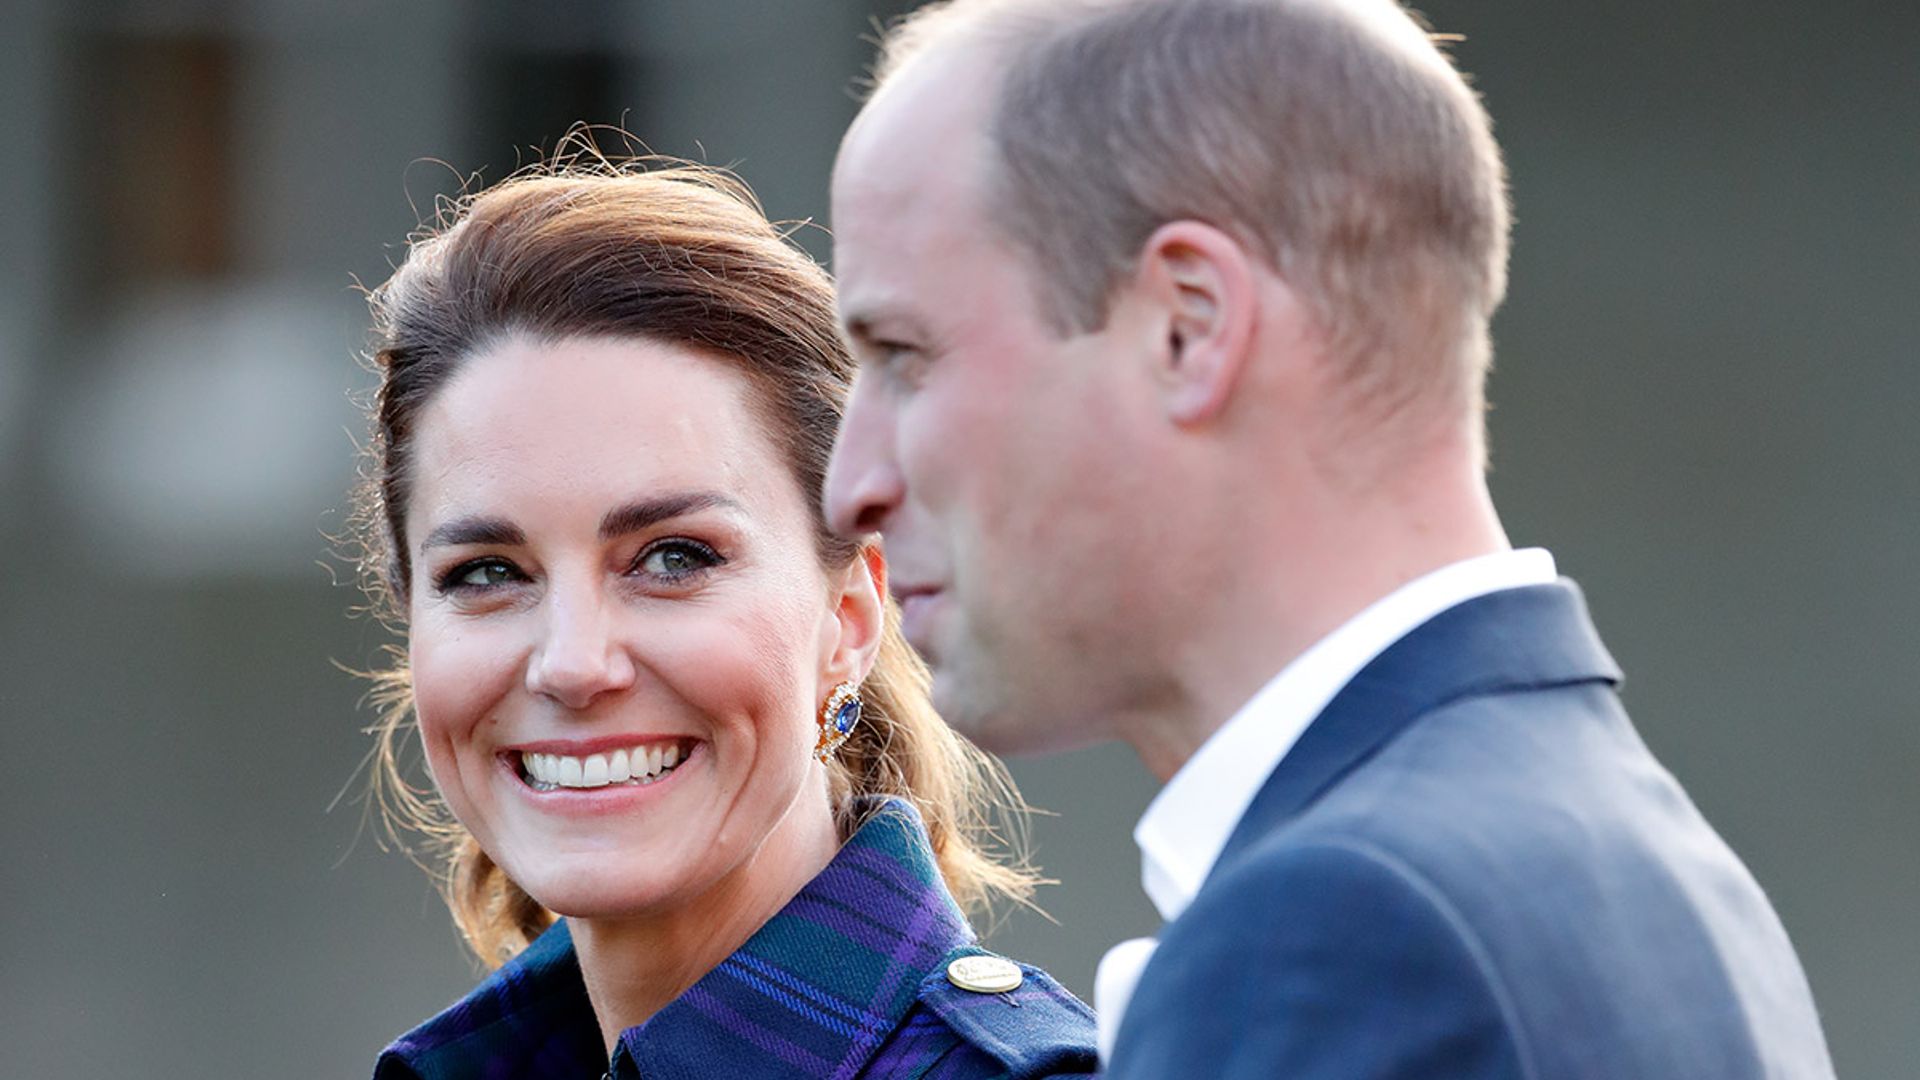 Kate Middleton and Prince William's photo with baby drives royal fans ...